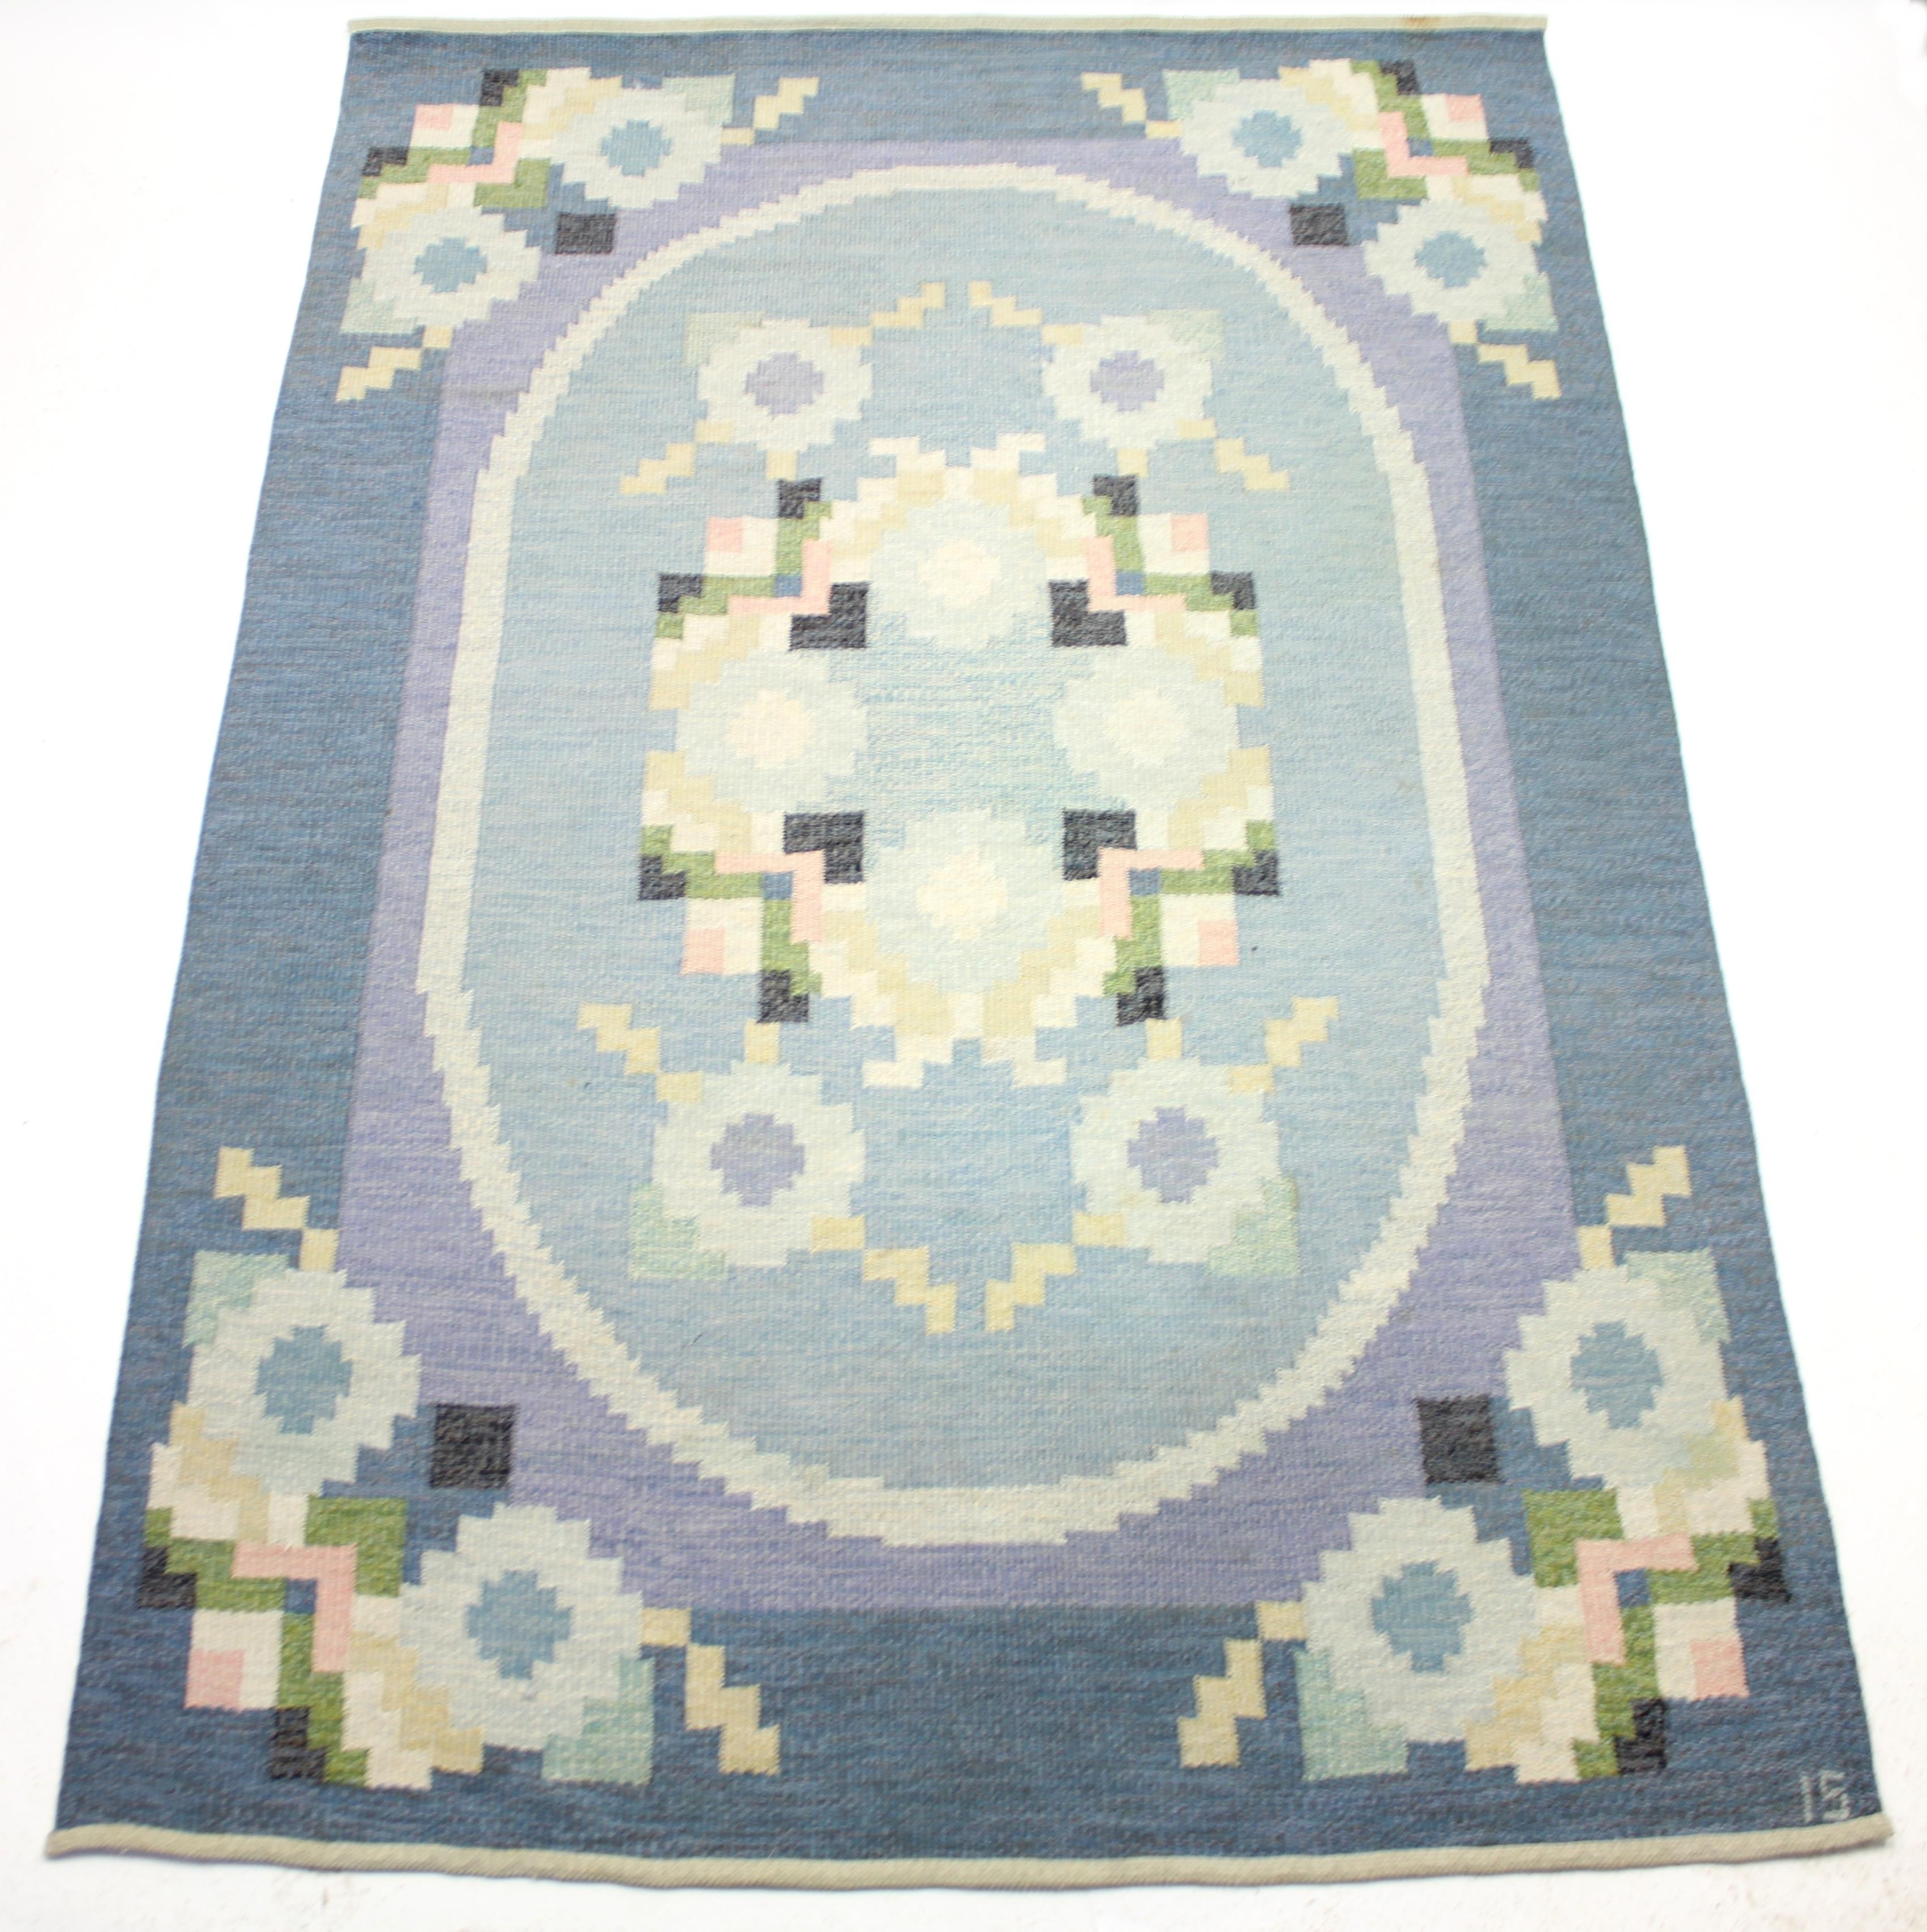 Flat weave Röllakan carpet designed by Ingered Silow in the 1950s. Very rare motif with butterflies in the corners. Main colours are different hues of blue with a dose of purple, pink, black and green. Newly cleaned by a professional carpet cleaning